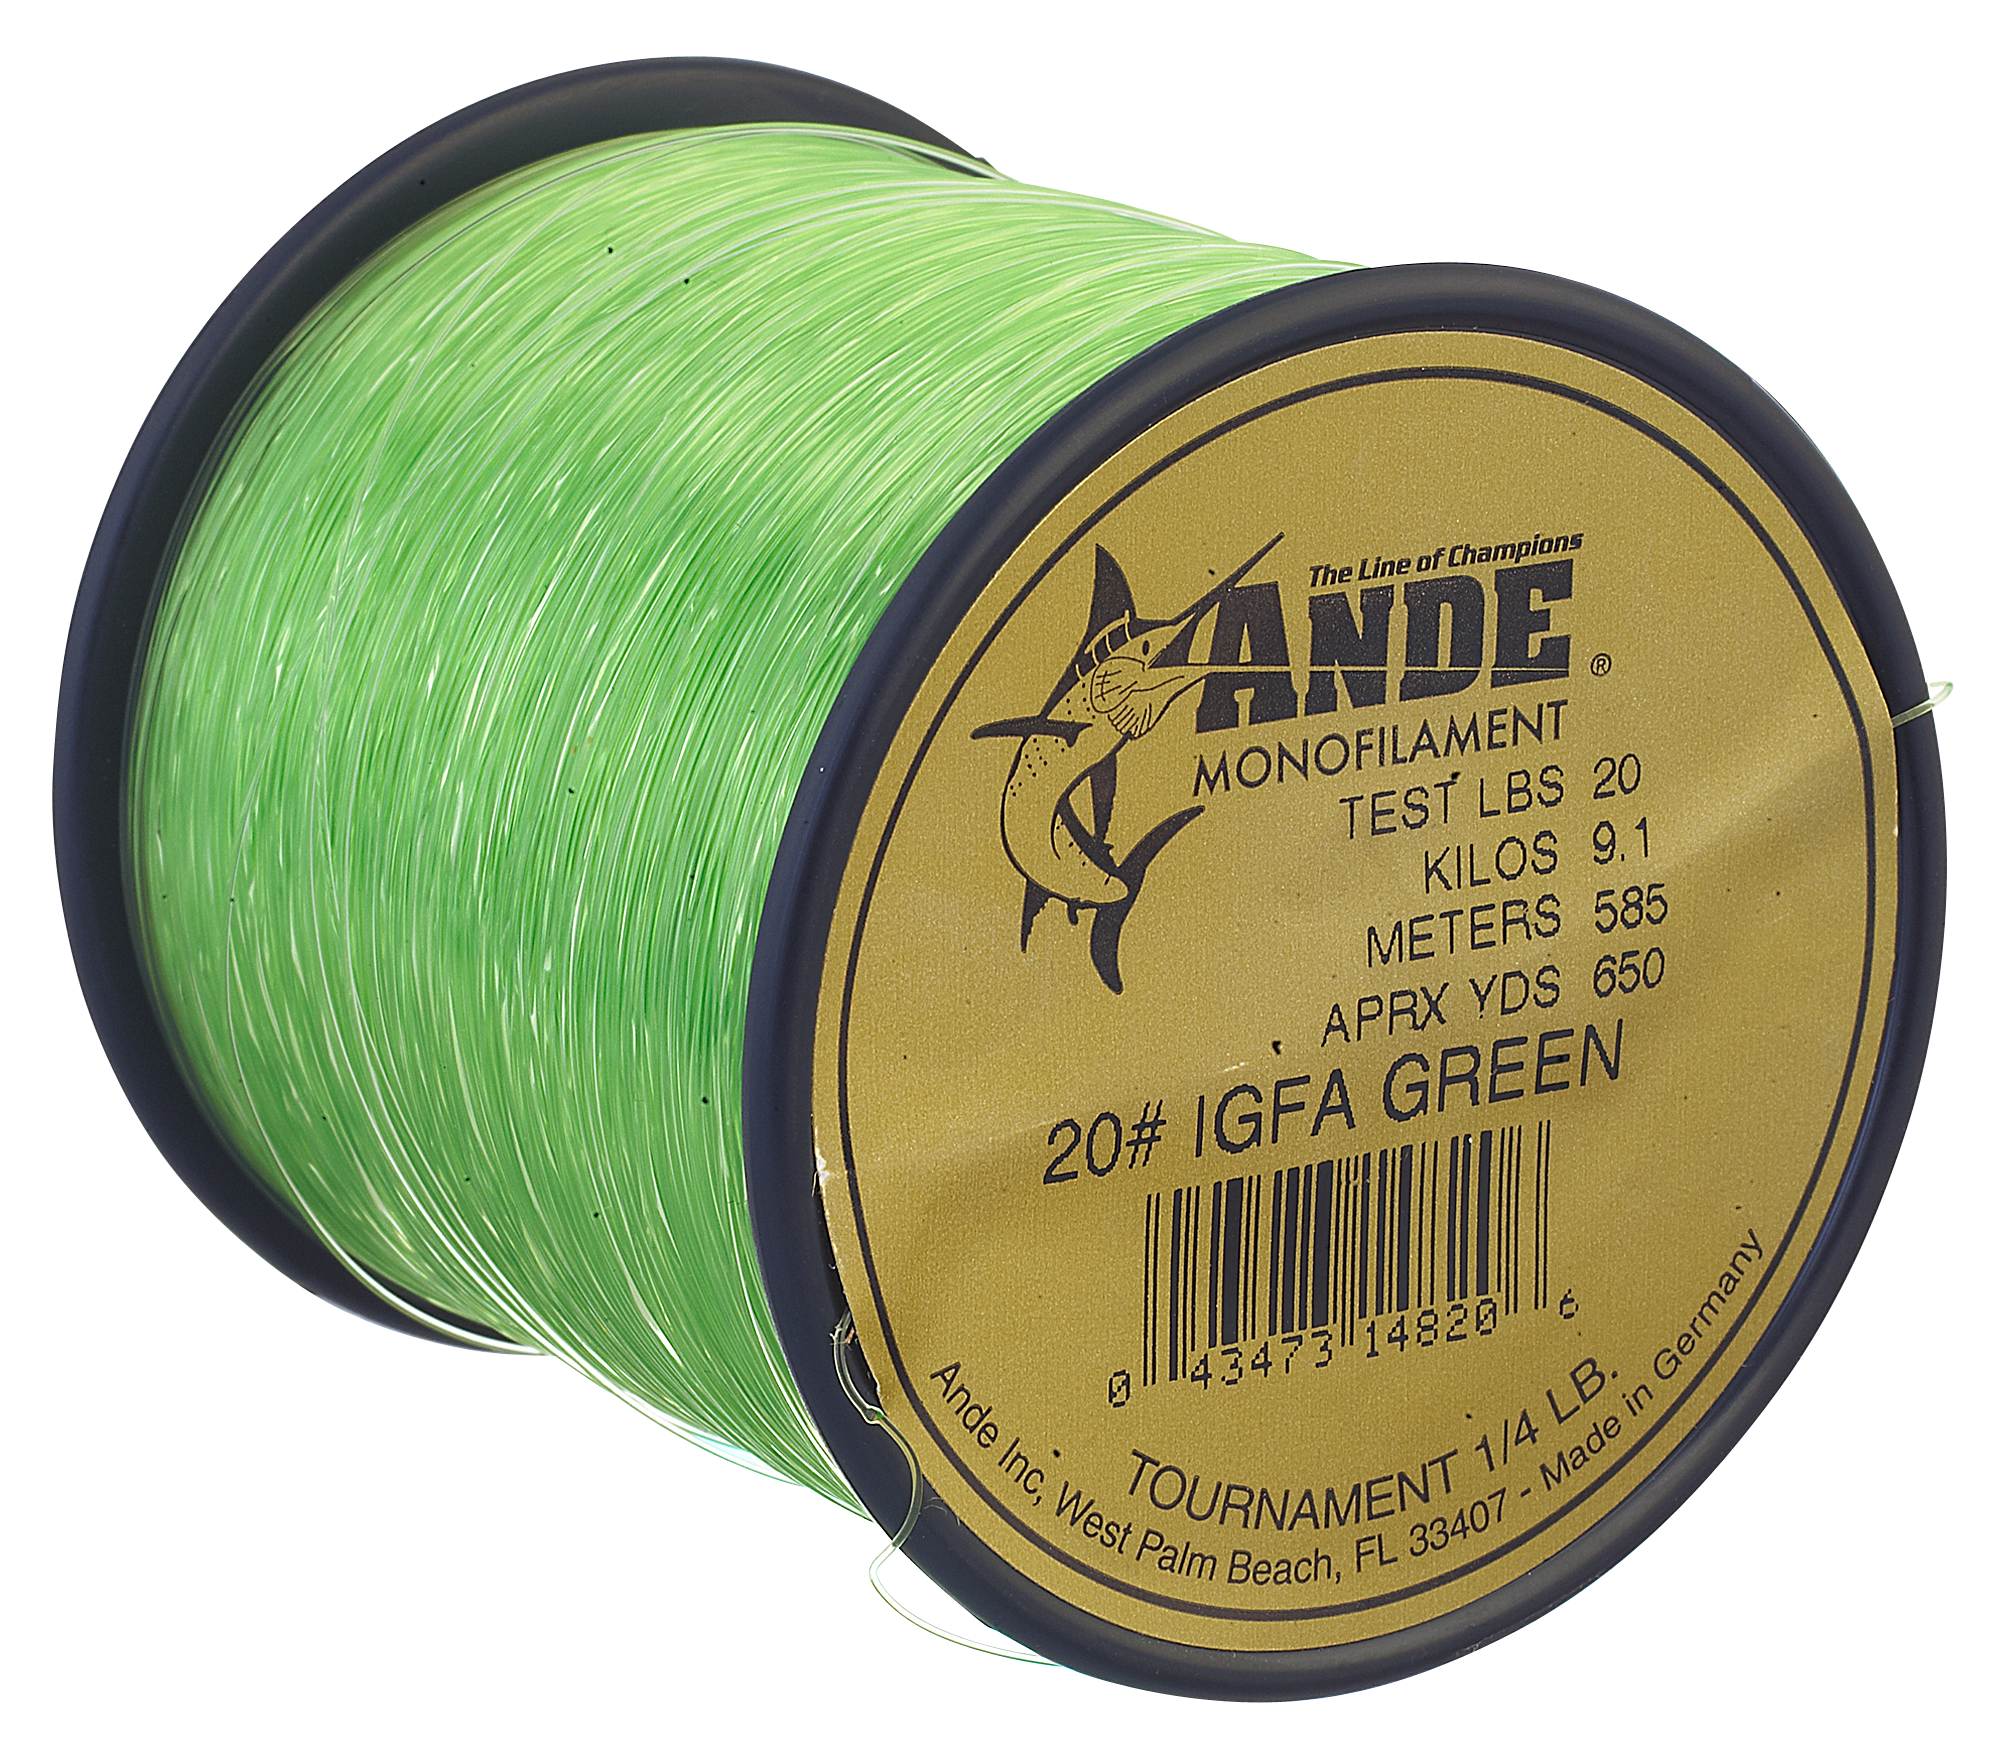 Monofilament Fishing Line For Sale